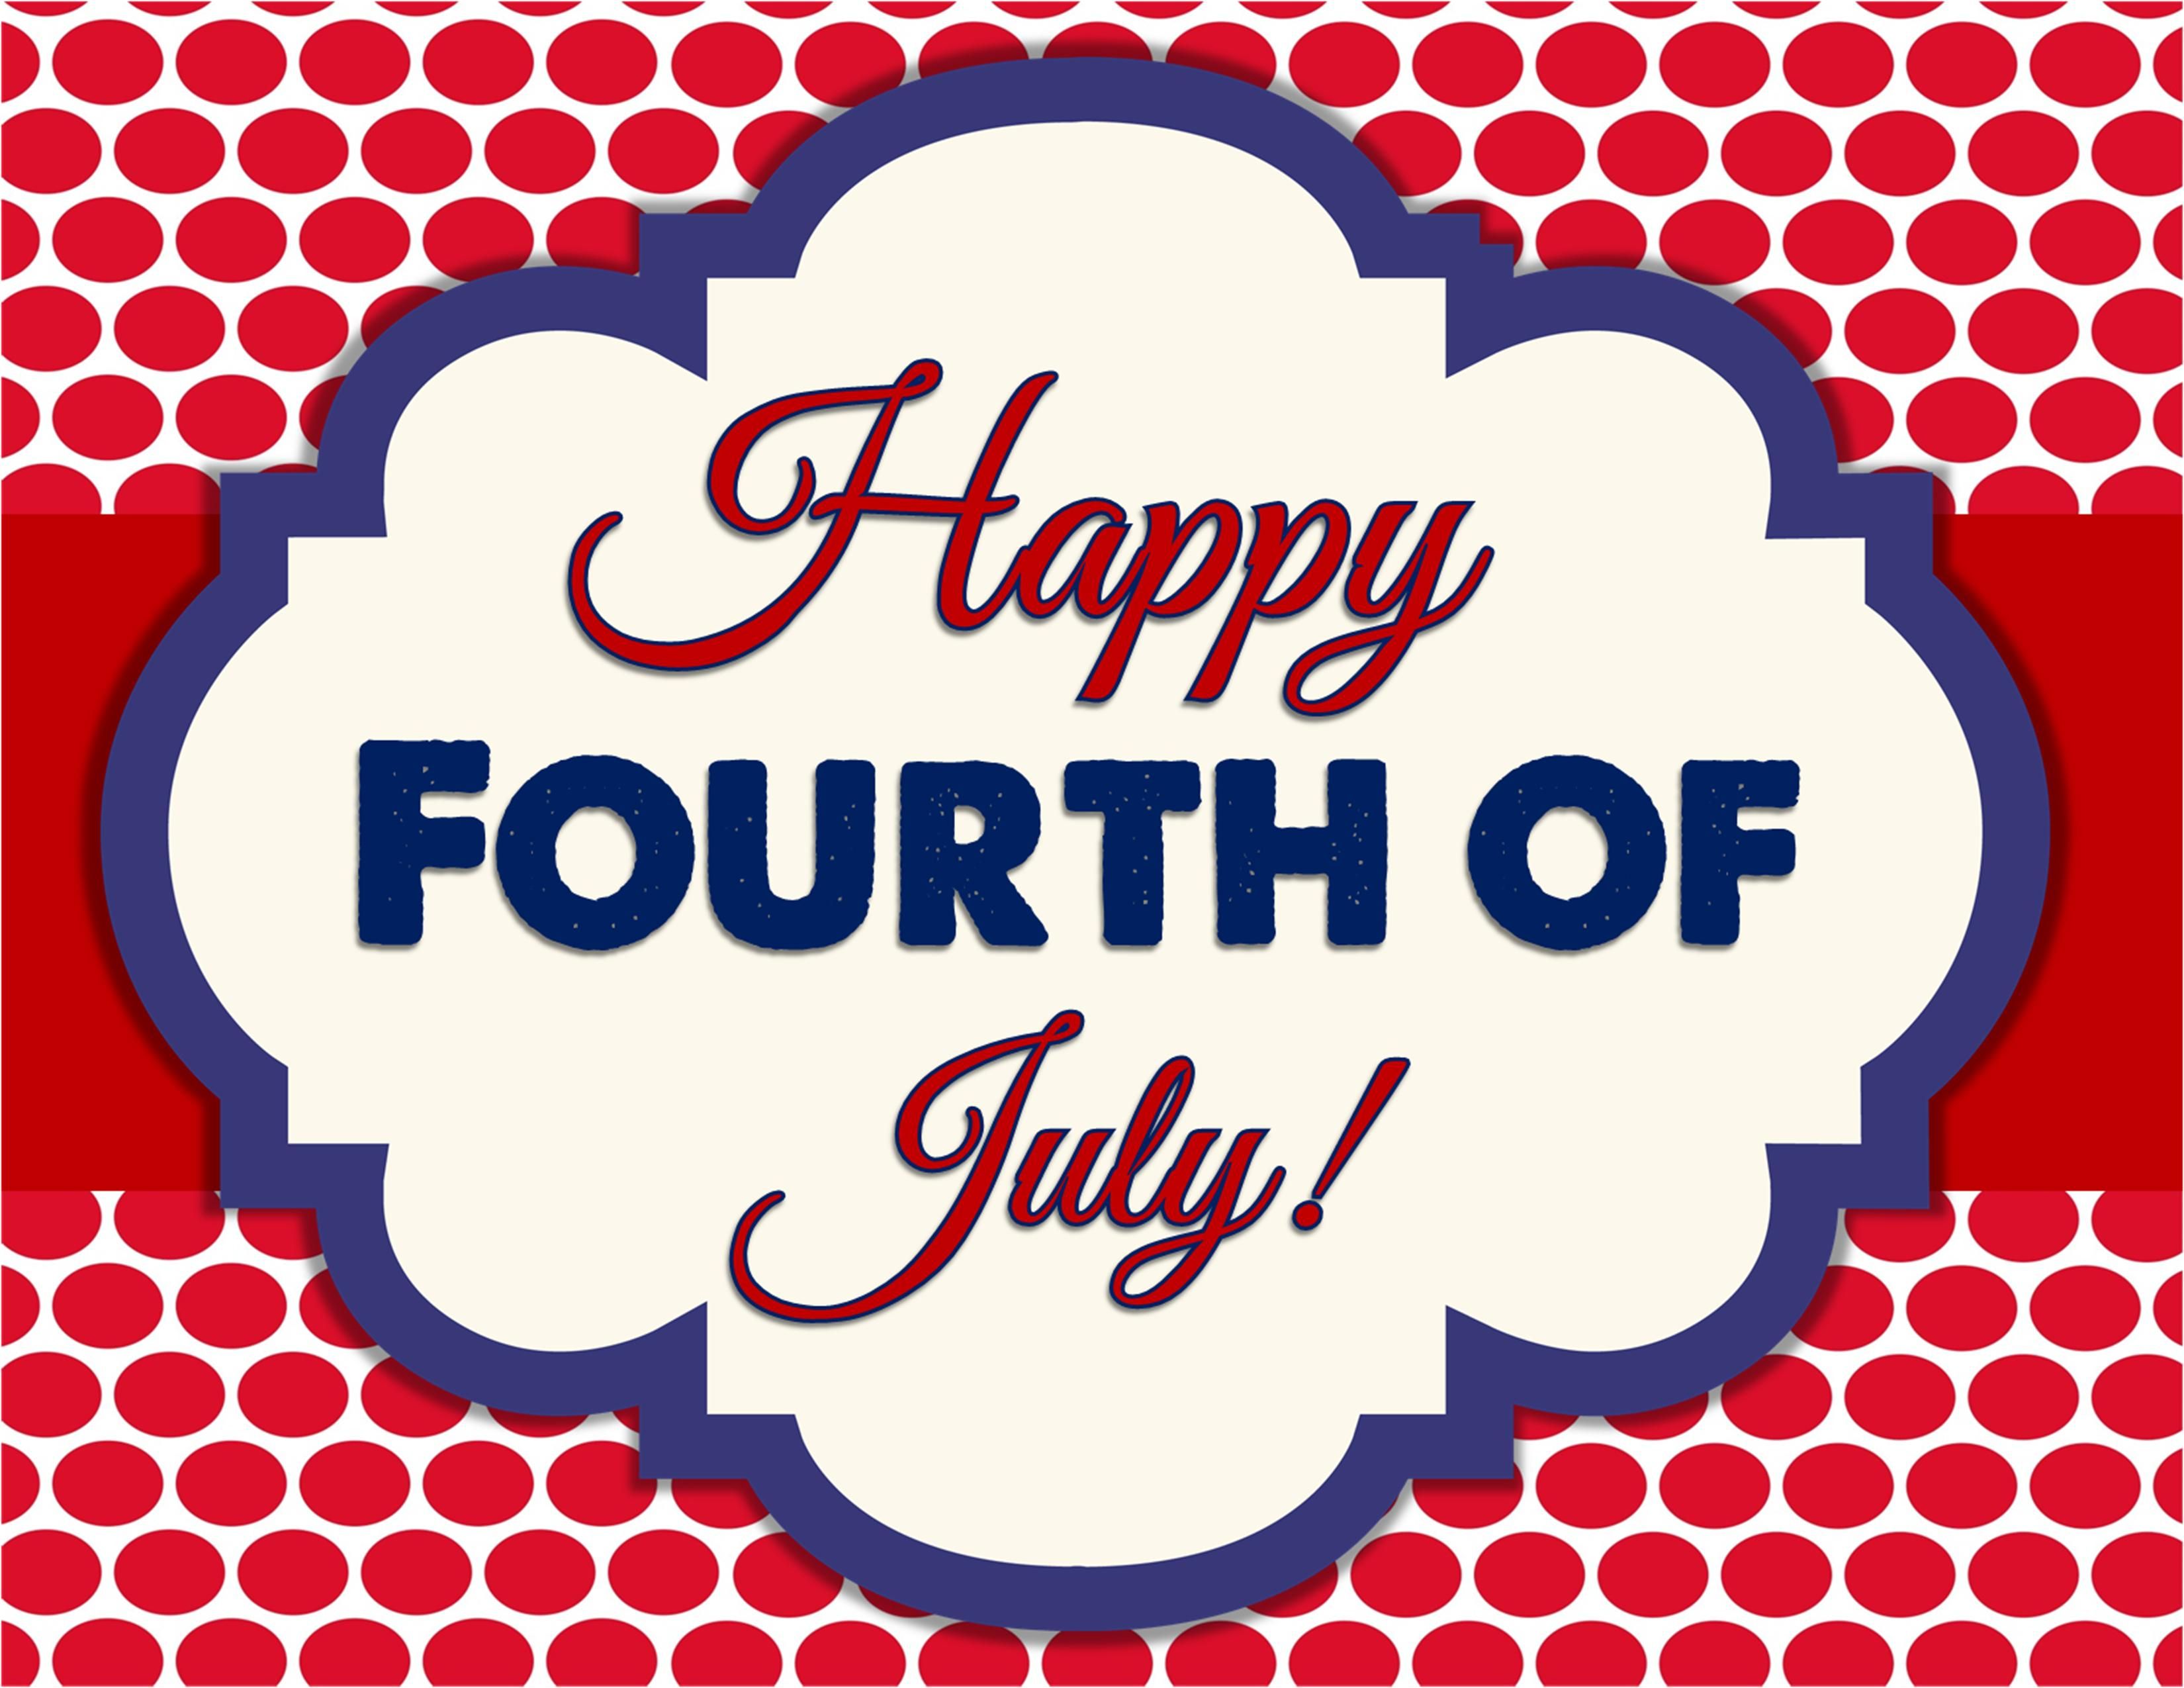 Happy 4th Of July Image 2020 Picture, Photo, Pics Free Download